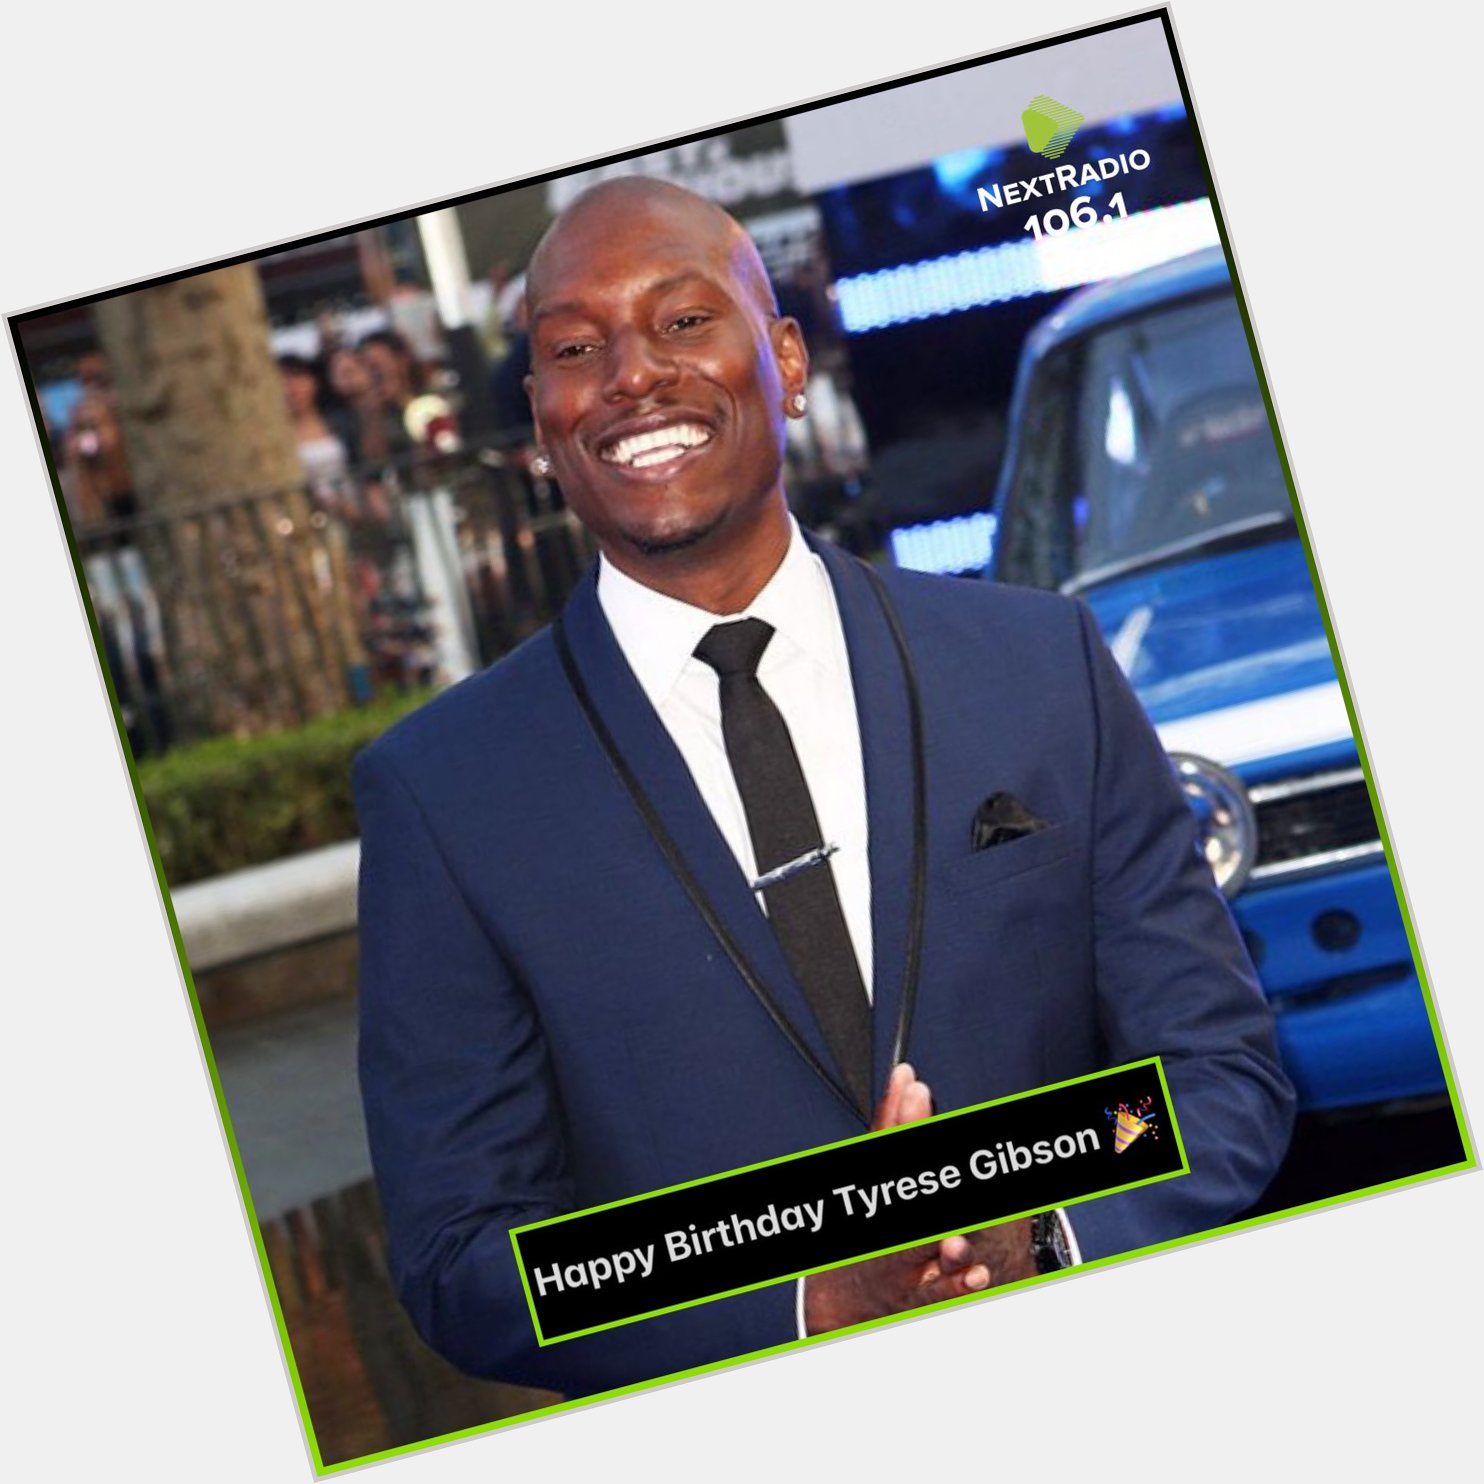 Happy Birthday Tyrese Gibson What is your favorite Tyrese Gibson movie? 